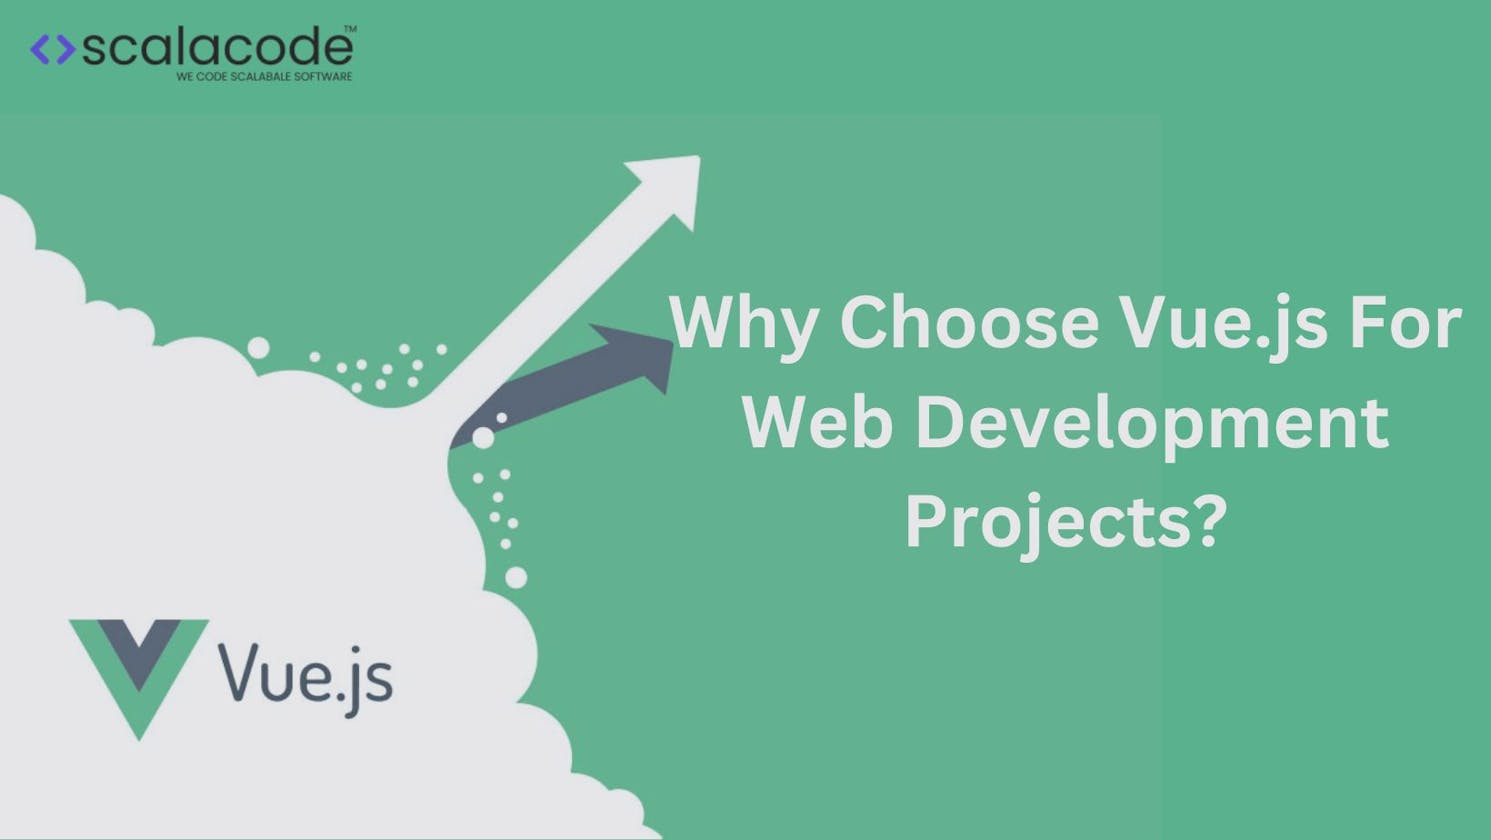 Why Choose Vue.js For Web Development Projects?